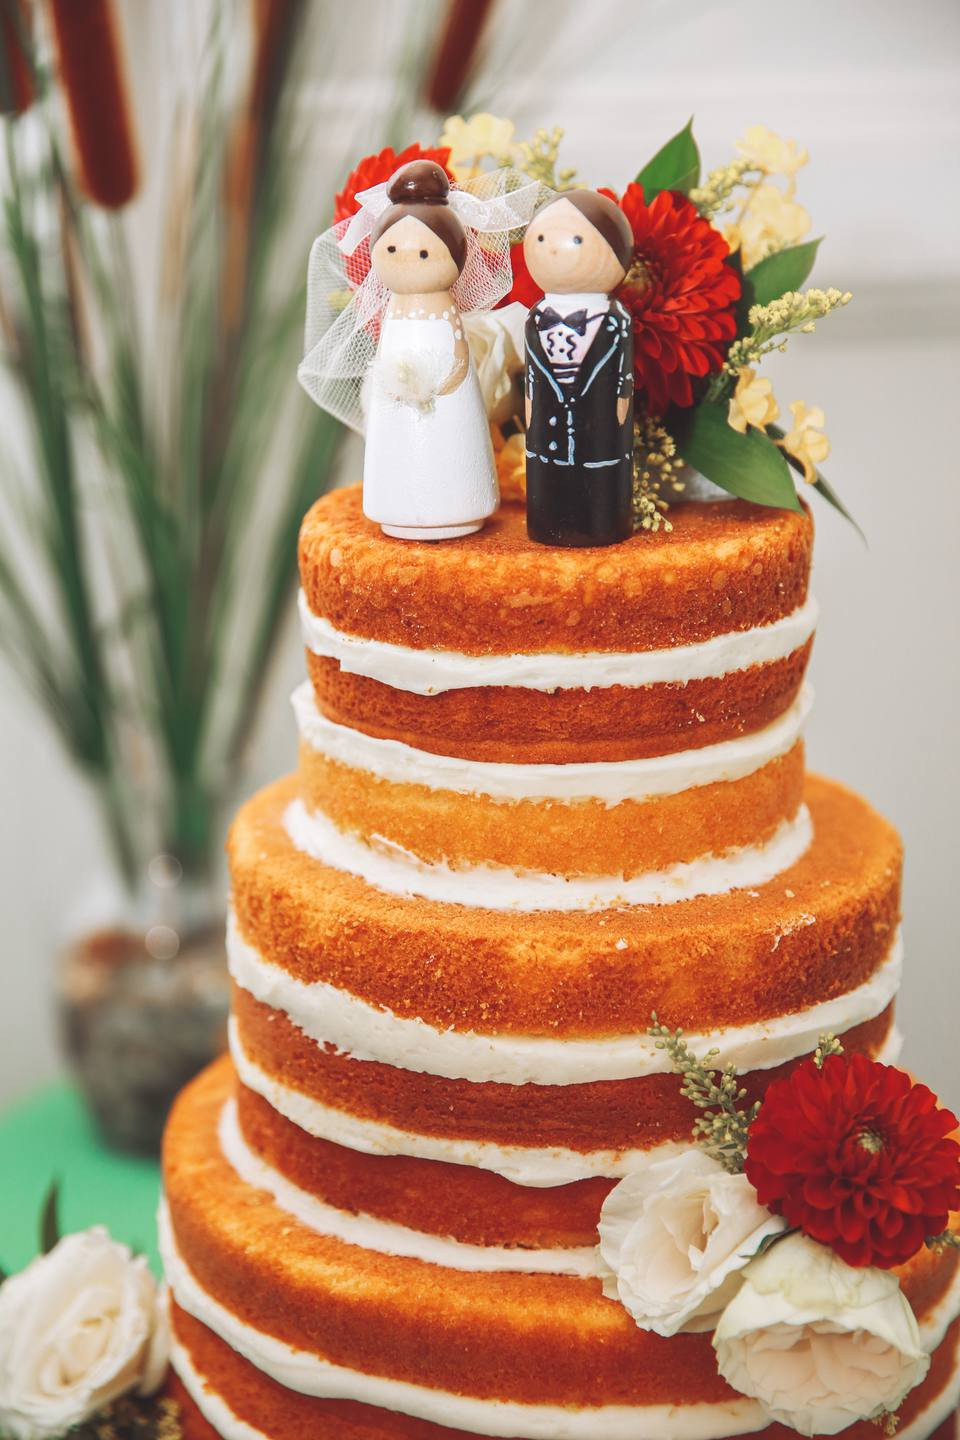 DIY Wedding Cakes
 10 Real Wedding Cakes That May Inspire You to DIY